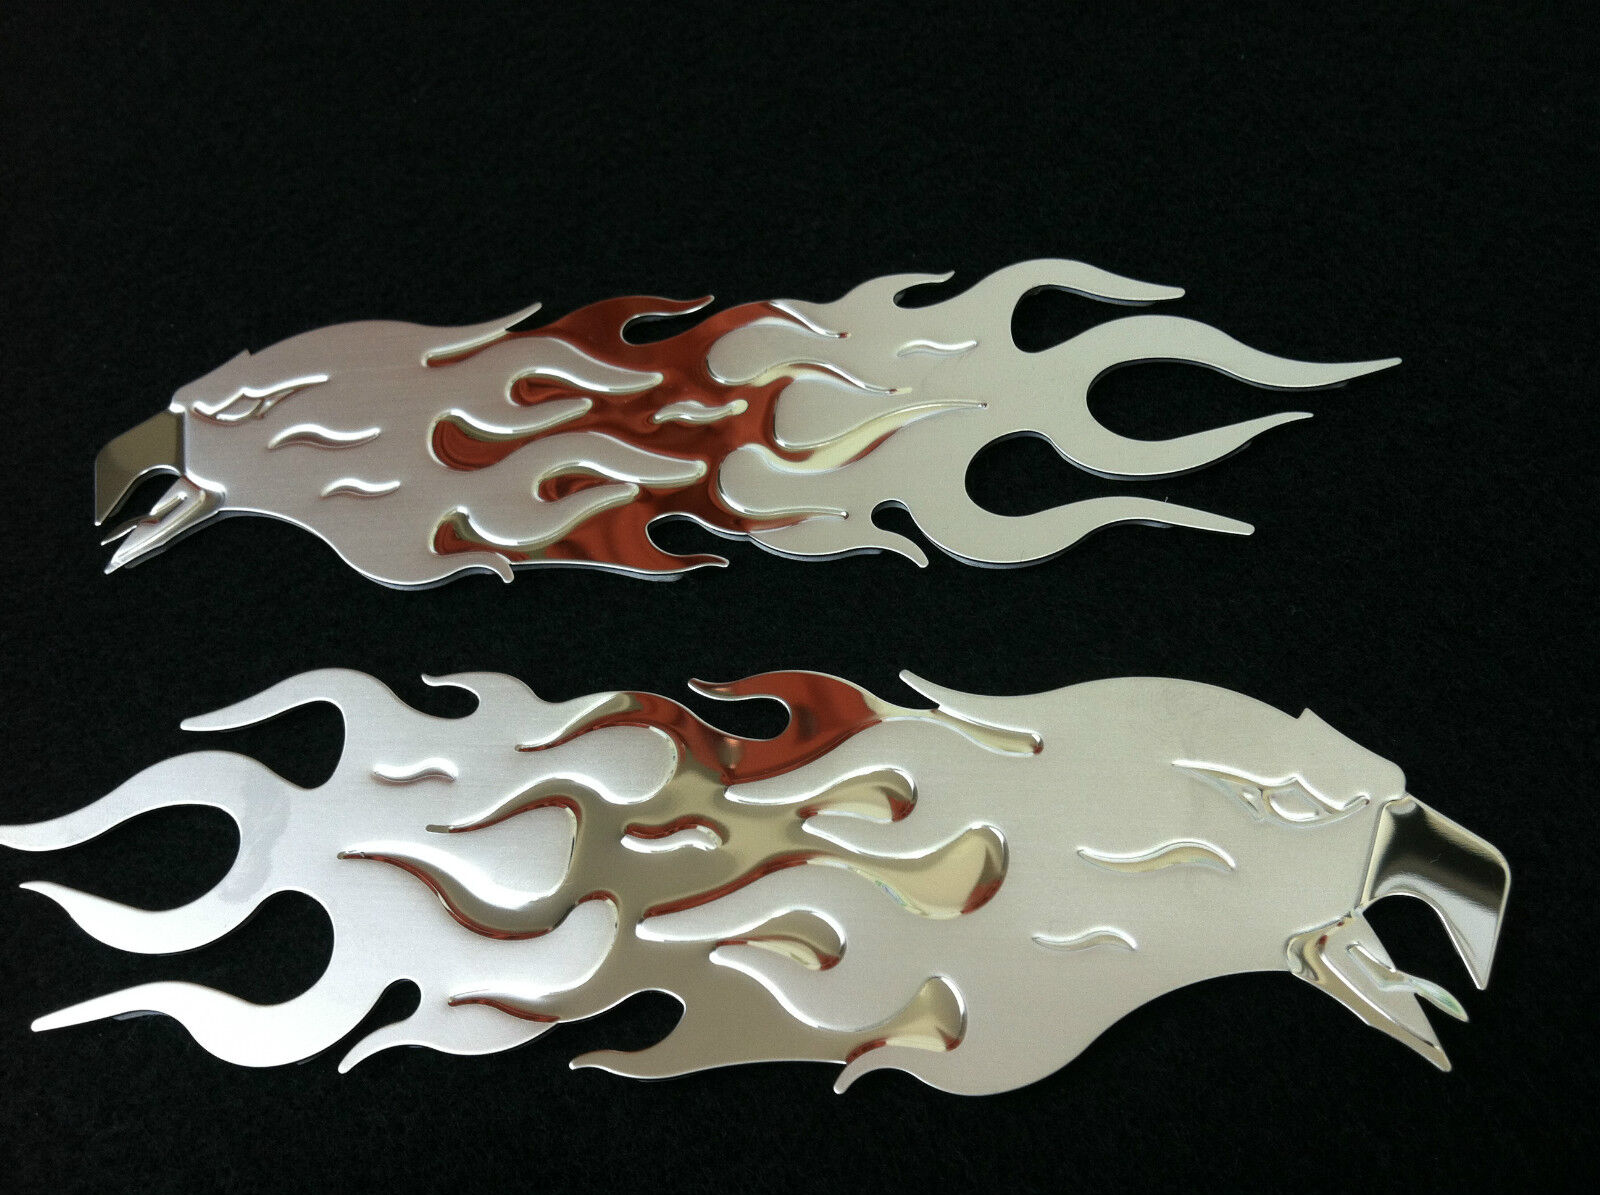 2 Bully Stainless Steel Chrome Screaming Eagle Flame Trim 3-D Emblem 3M Adhesive